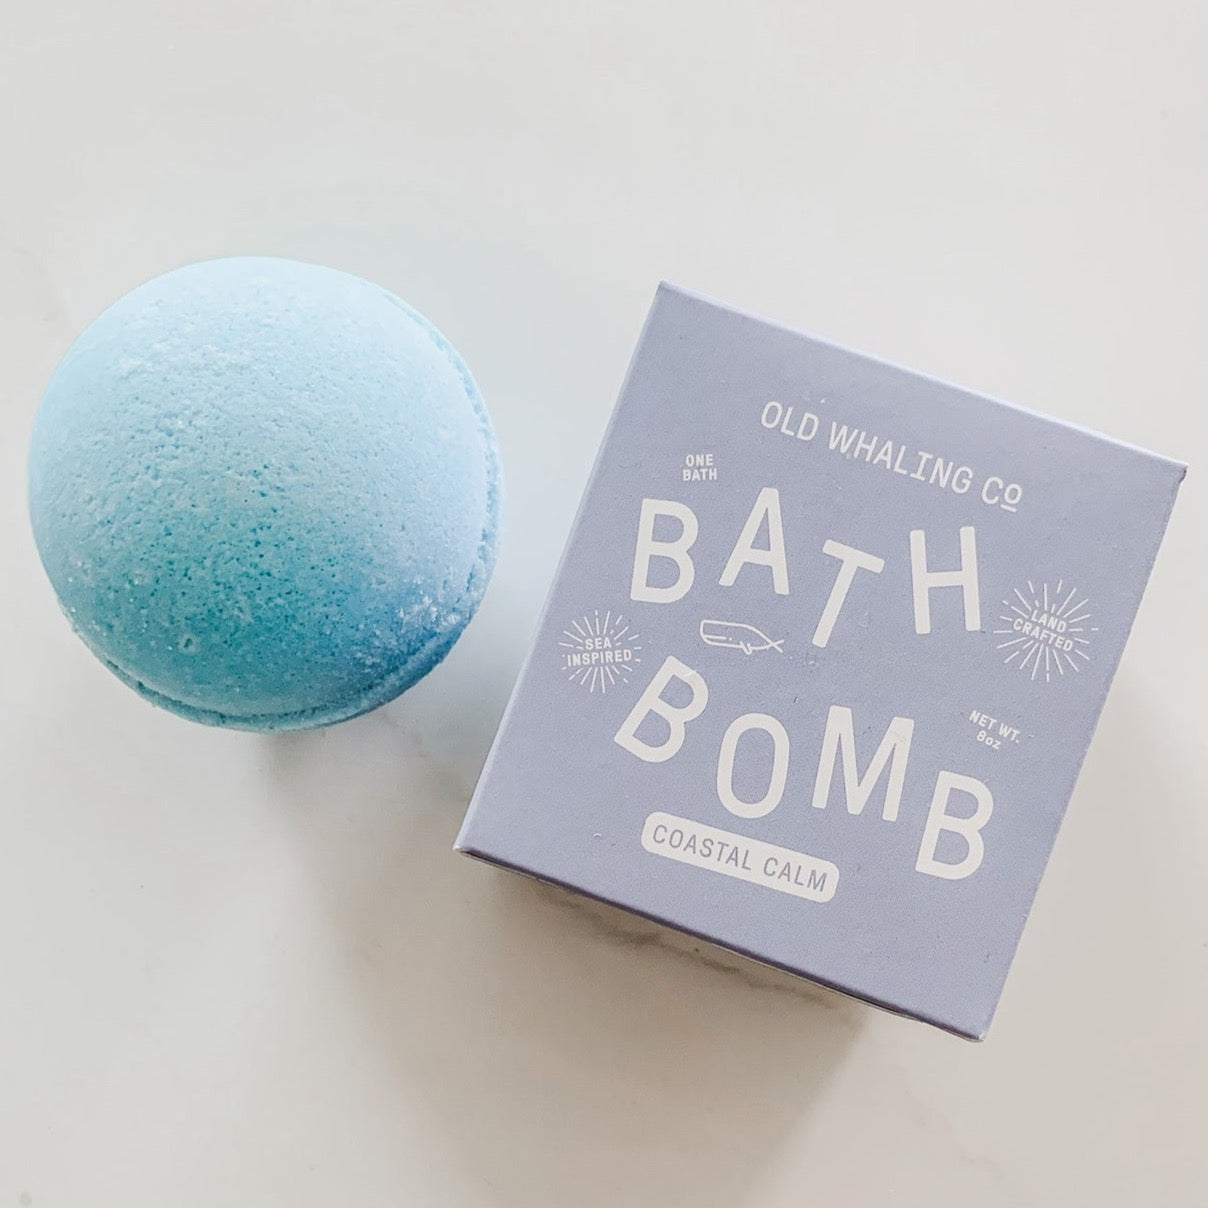 Blue bath bomb next to blue box with white text.